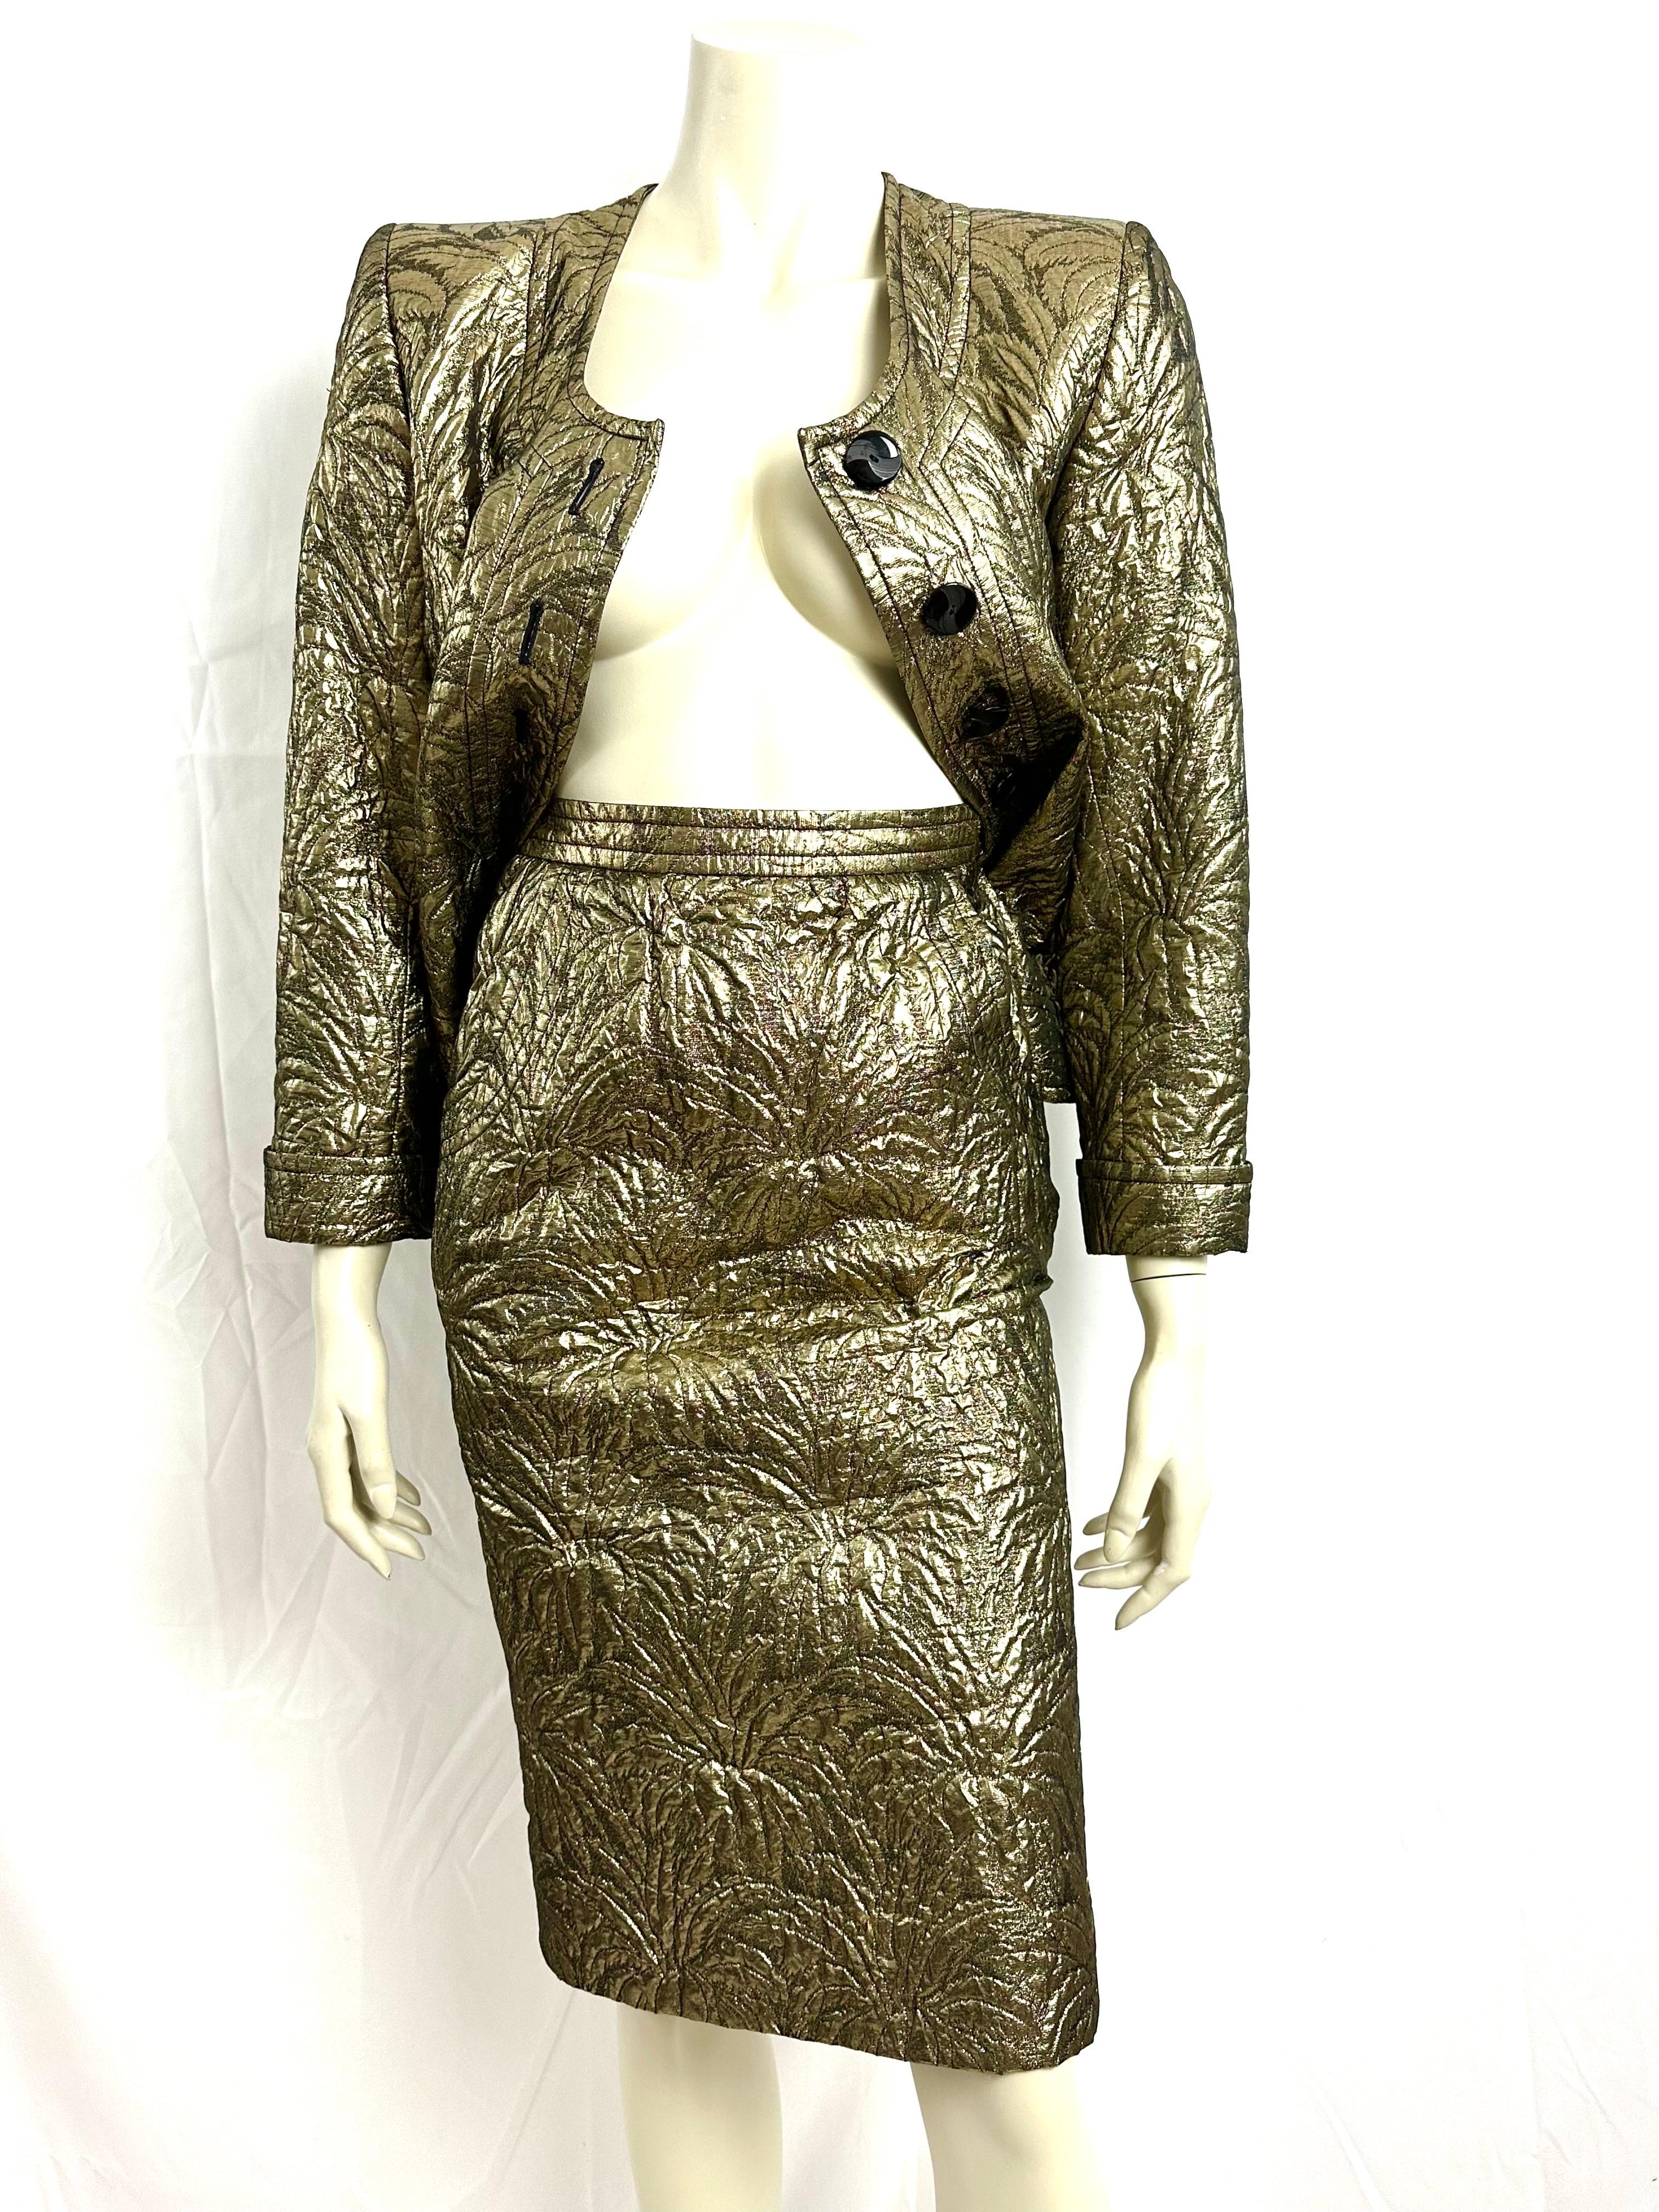 YSL Yves saint Laurent gold brocade skirt suit F/W 86 For Sale 2